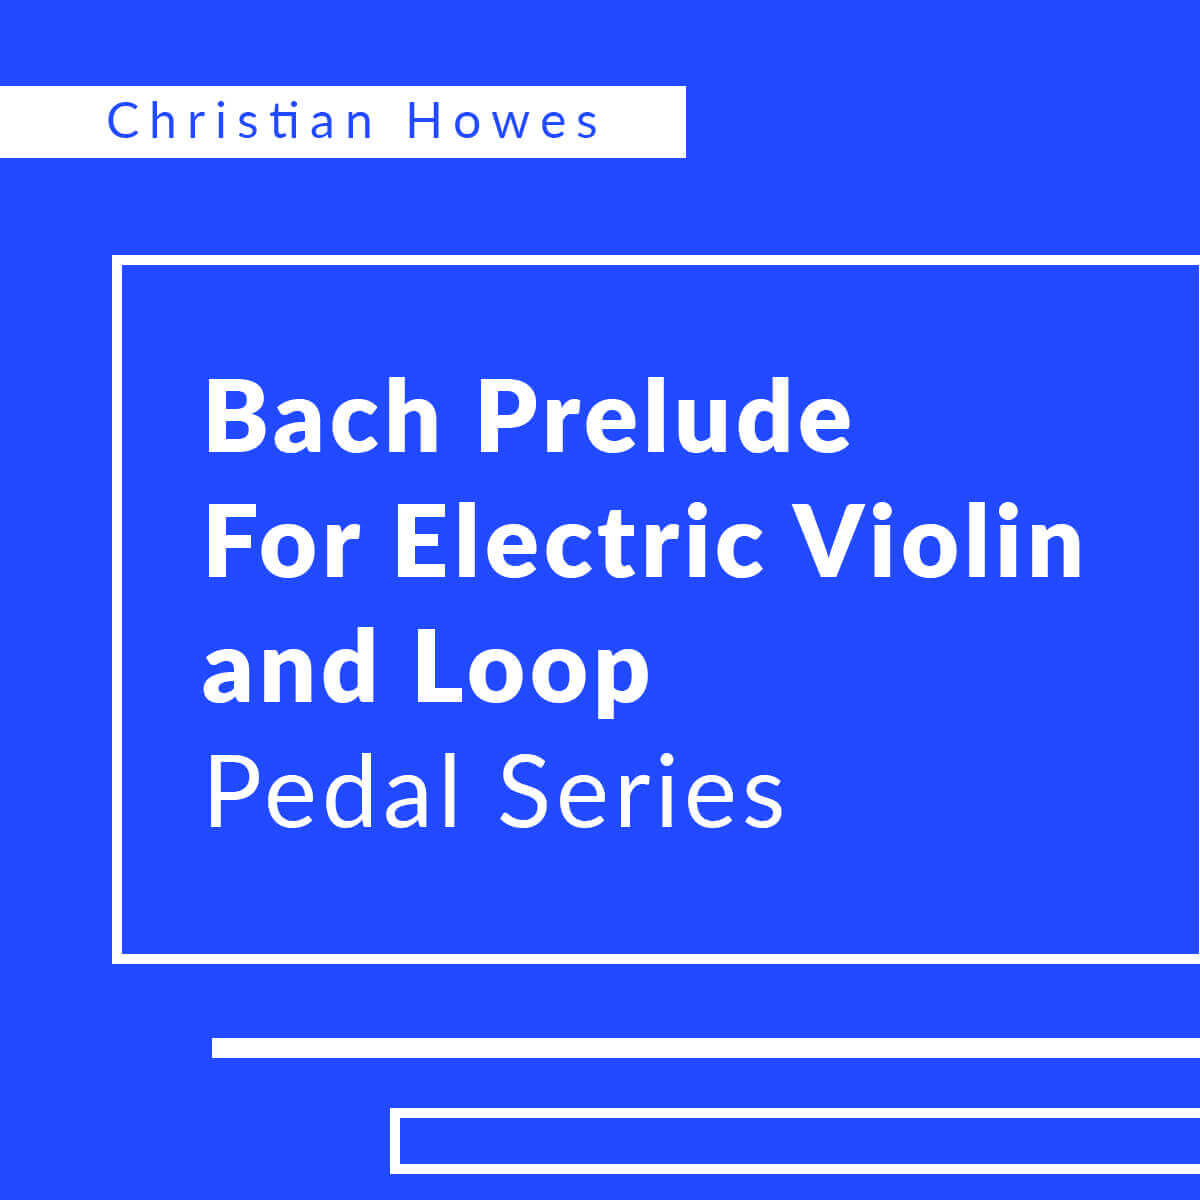 Bach Prelude For Electric Violin and Loop Pedal Series